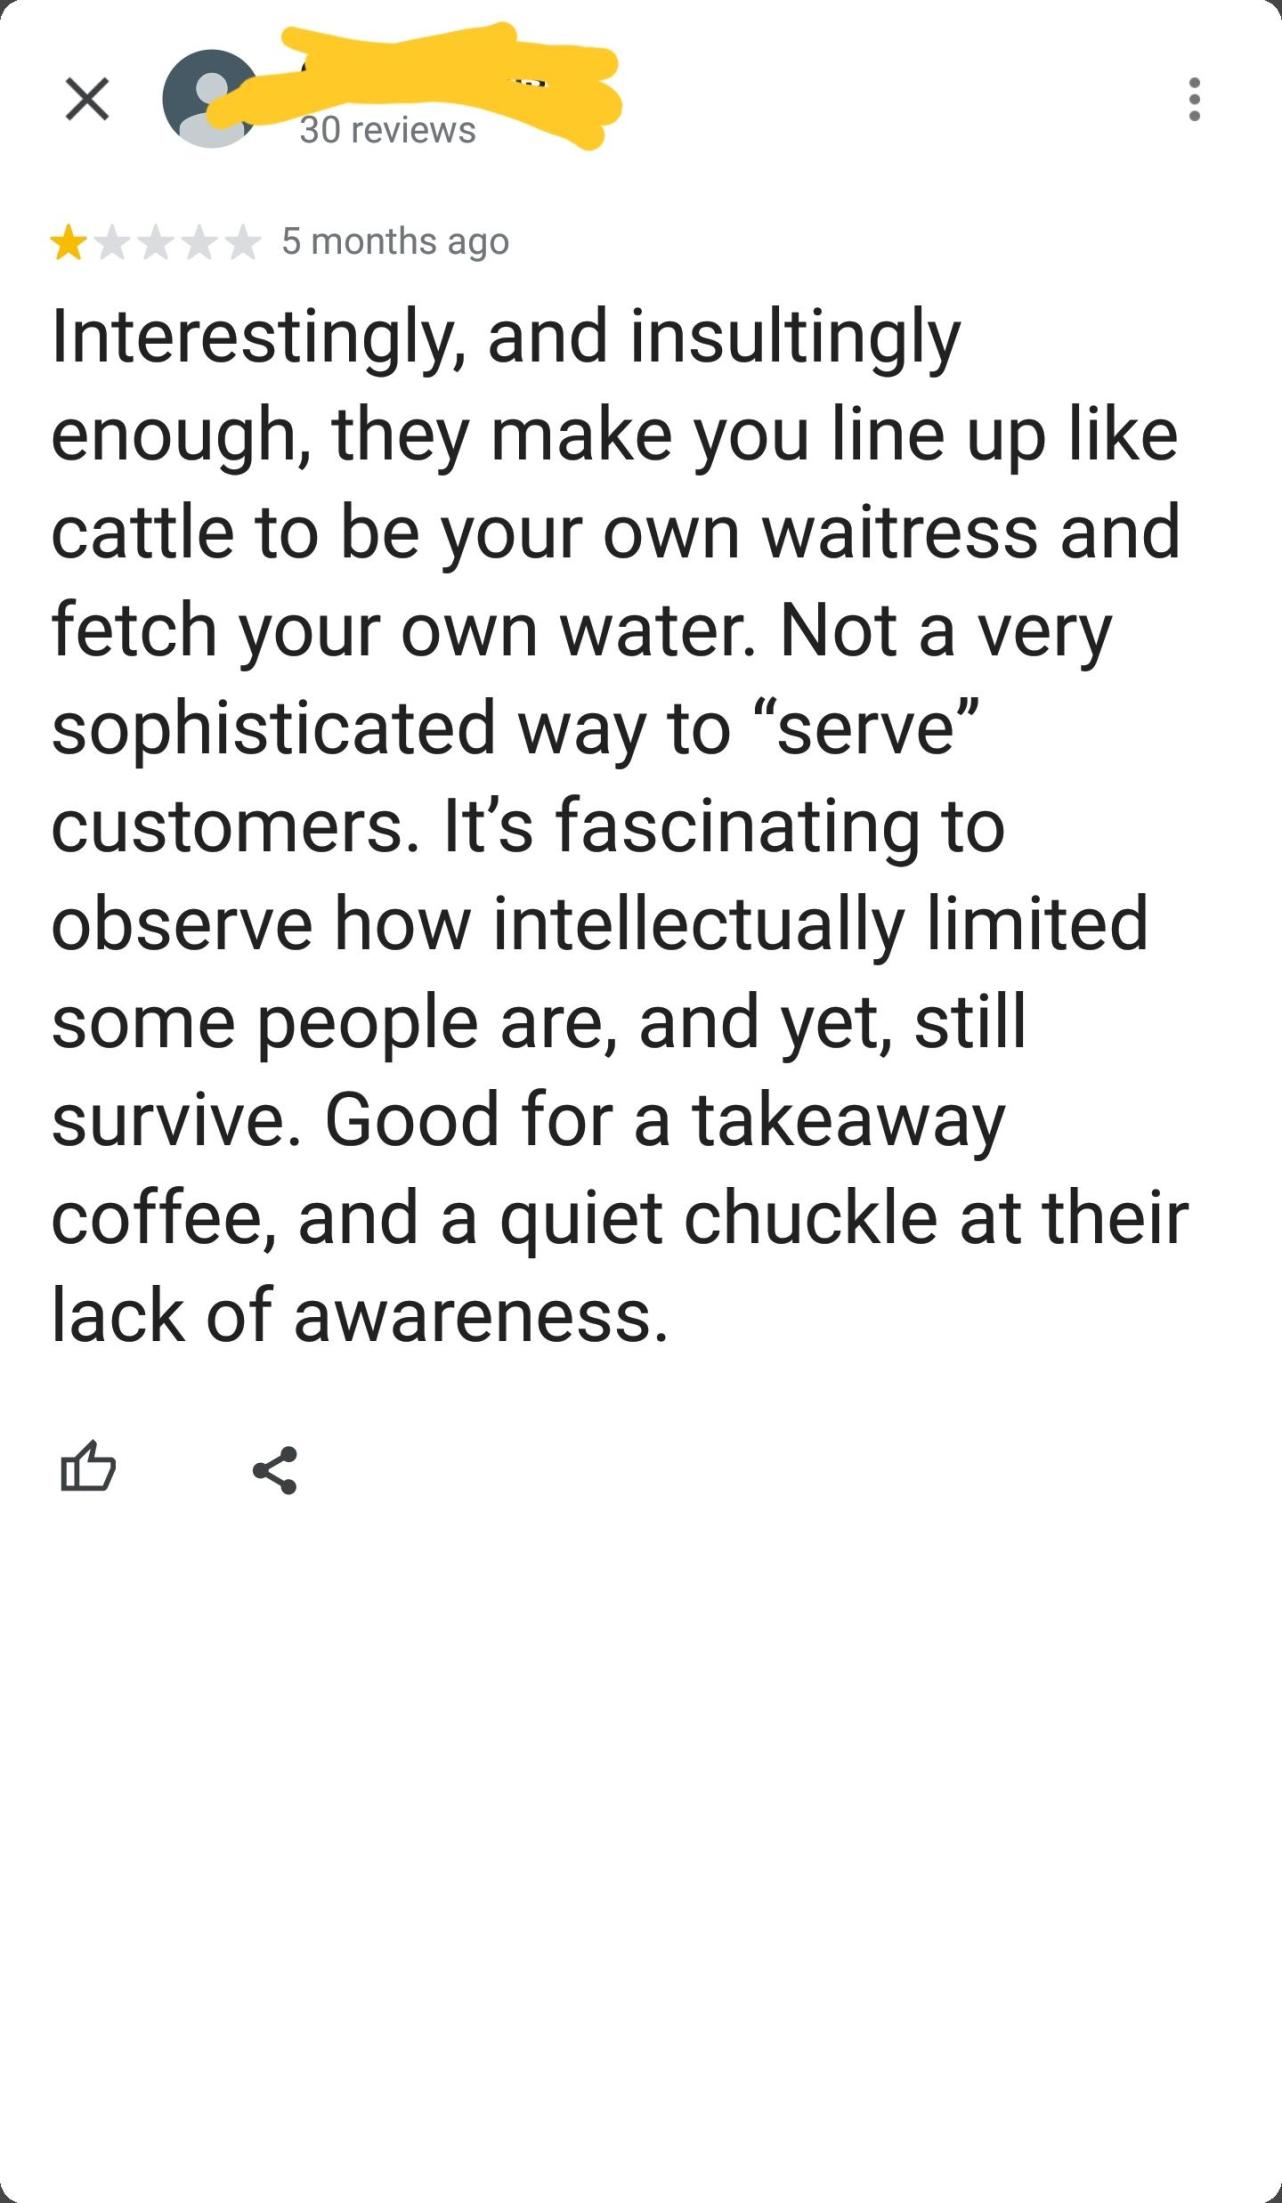 angle - 30 reviews 5 months ago Interestingly, and insultingly enough, they make you line up cattle to be your own waitress and fetch your own water. Not a very sophisticated way to "serve" customers. It's fascinating to observe how intellectually limited